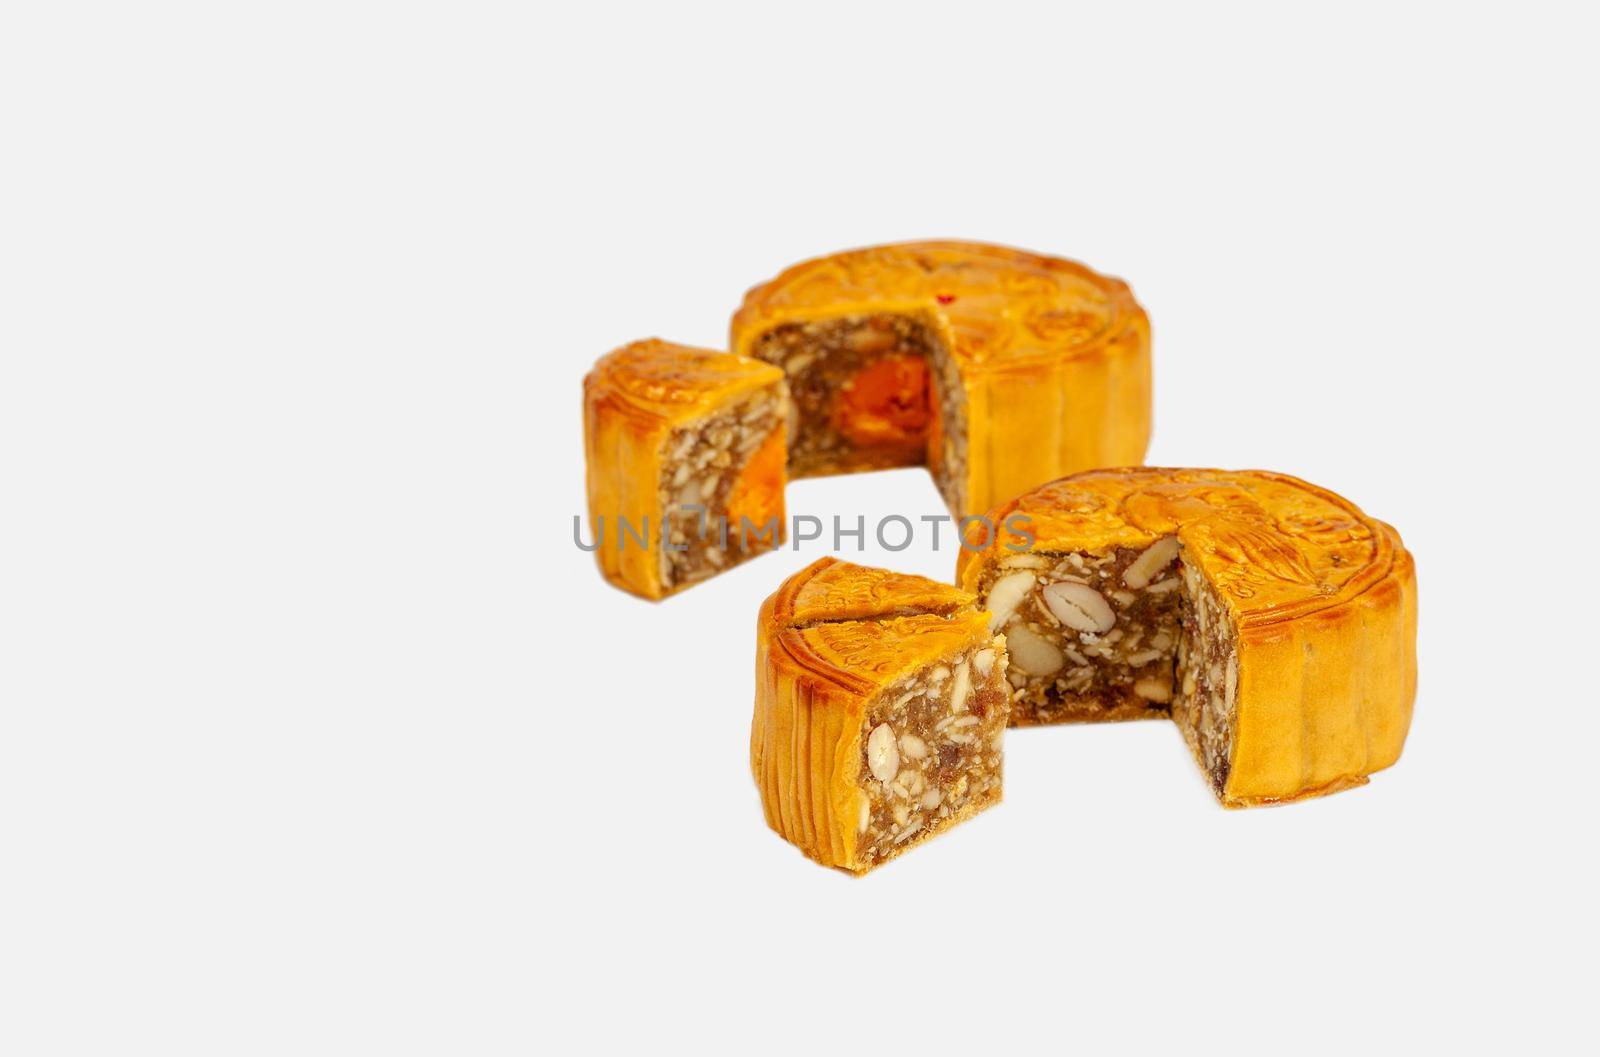 Wuren (Mixed Nuts) and  Salted Egg Yolk filling Mooncake on white background